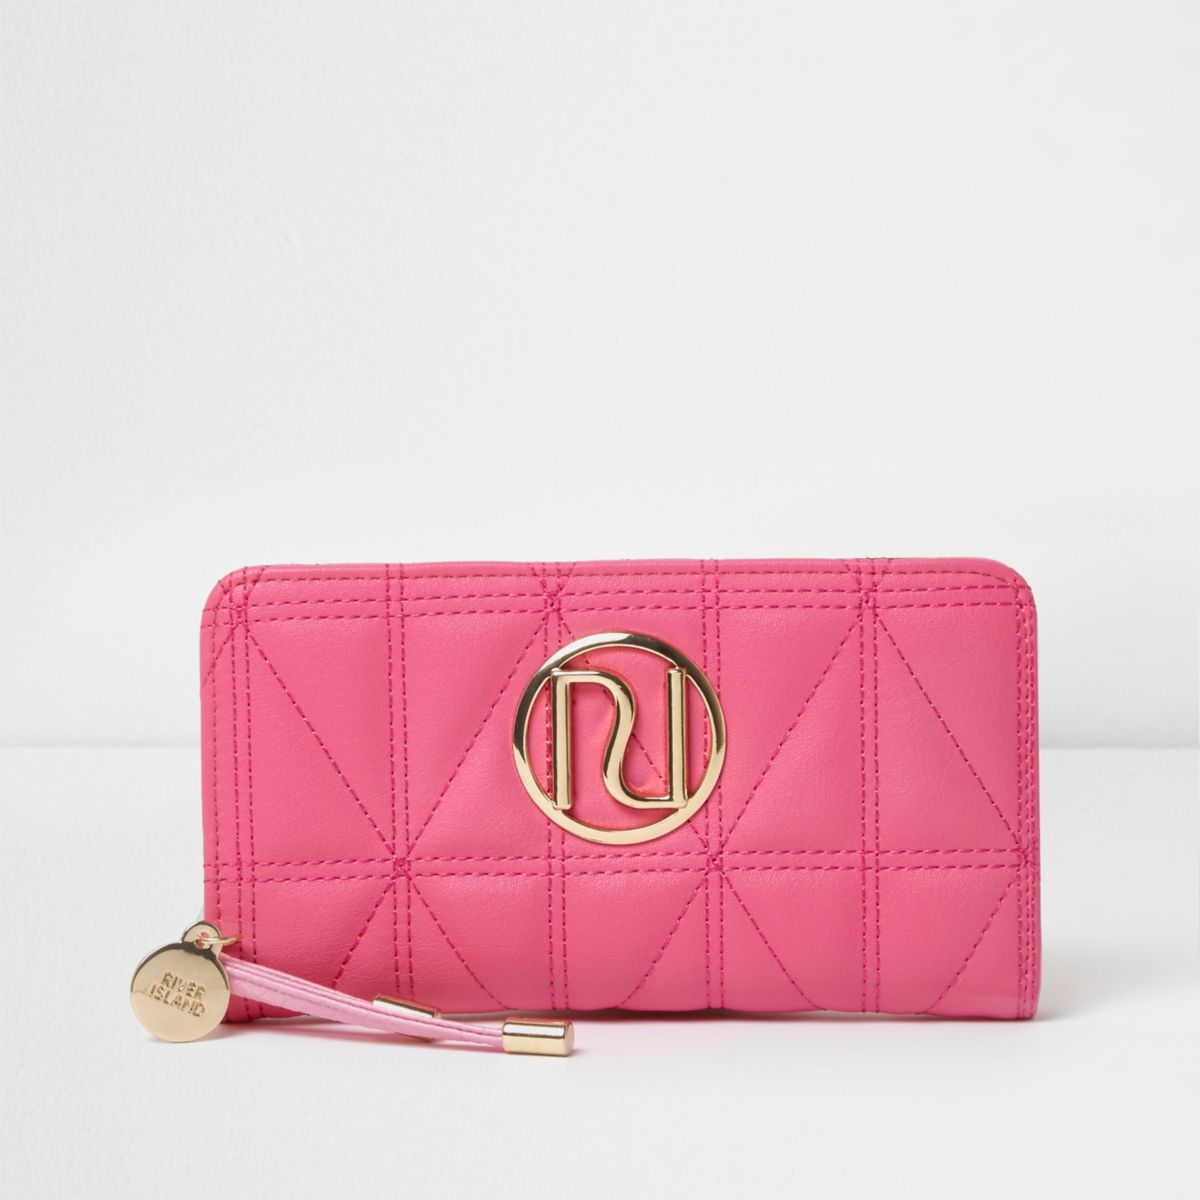 Bright pink quilted foldout purse - Bags & Purses - Sale - women